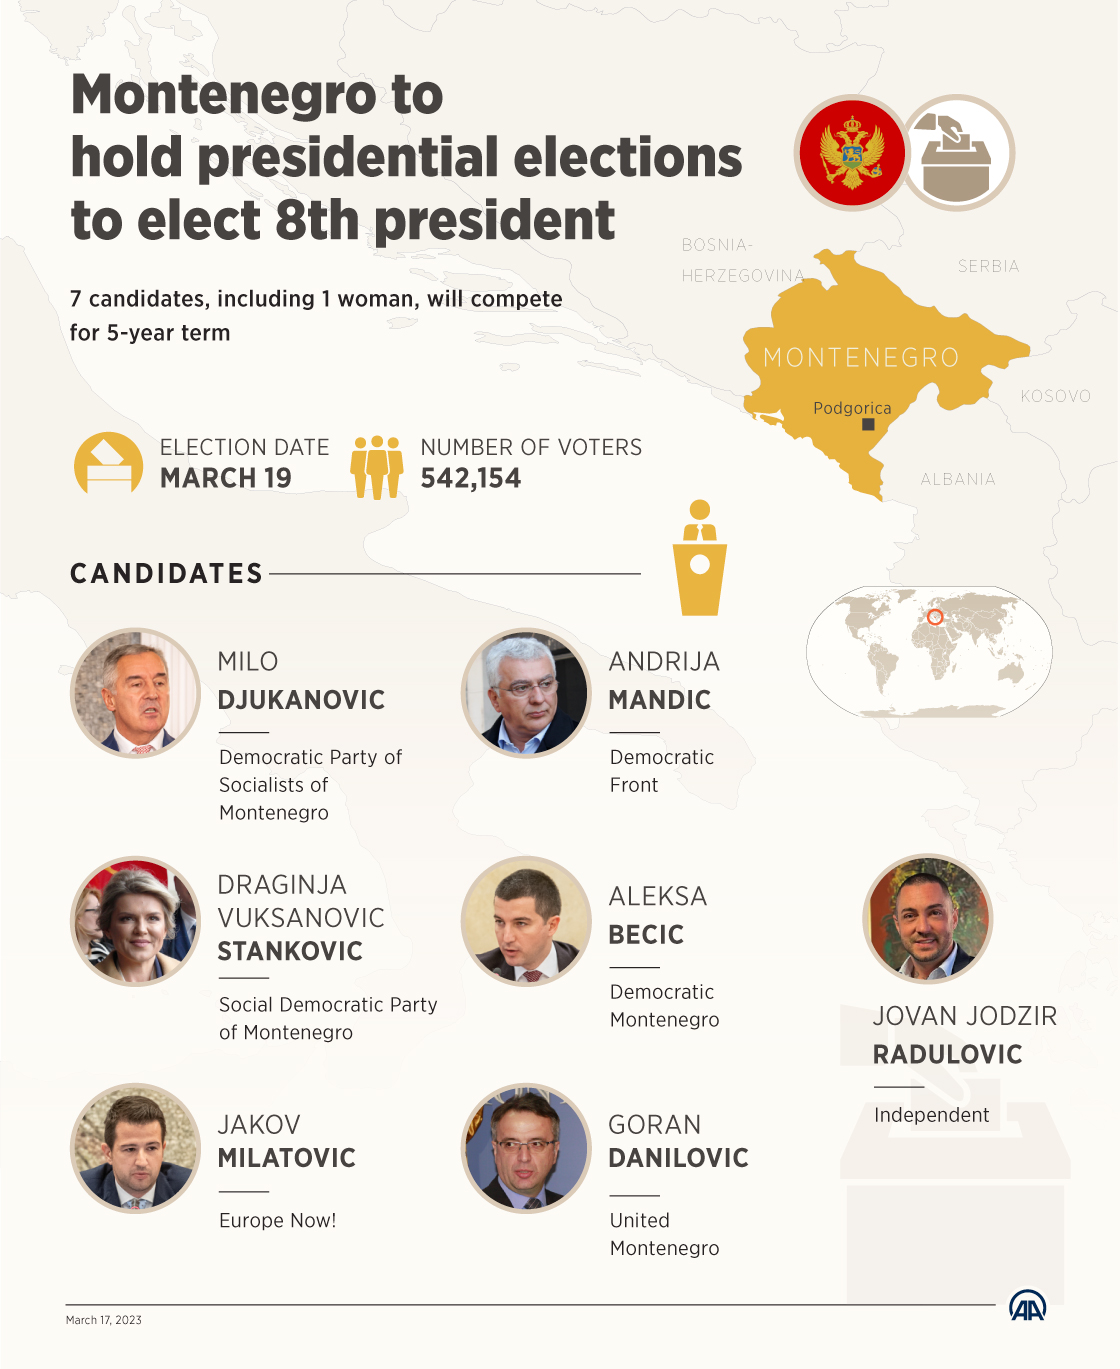 Montenegro to hold presidential elections to elect 8th president